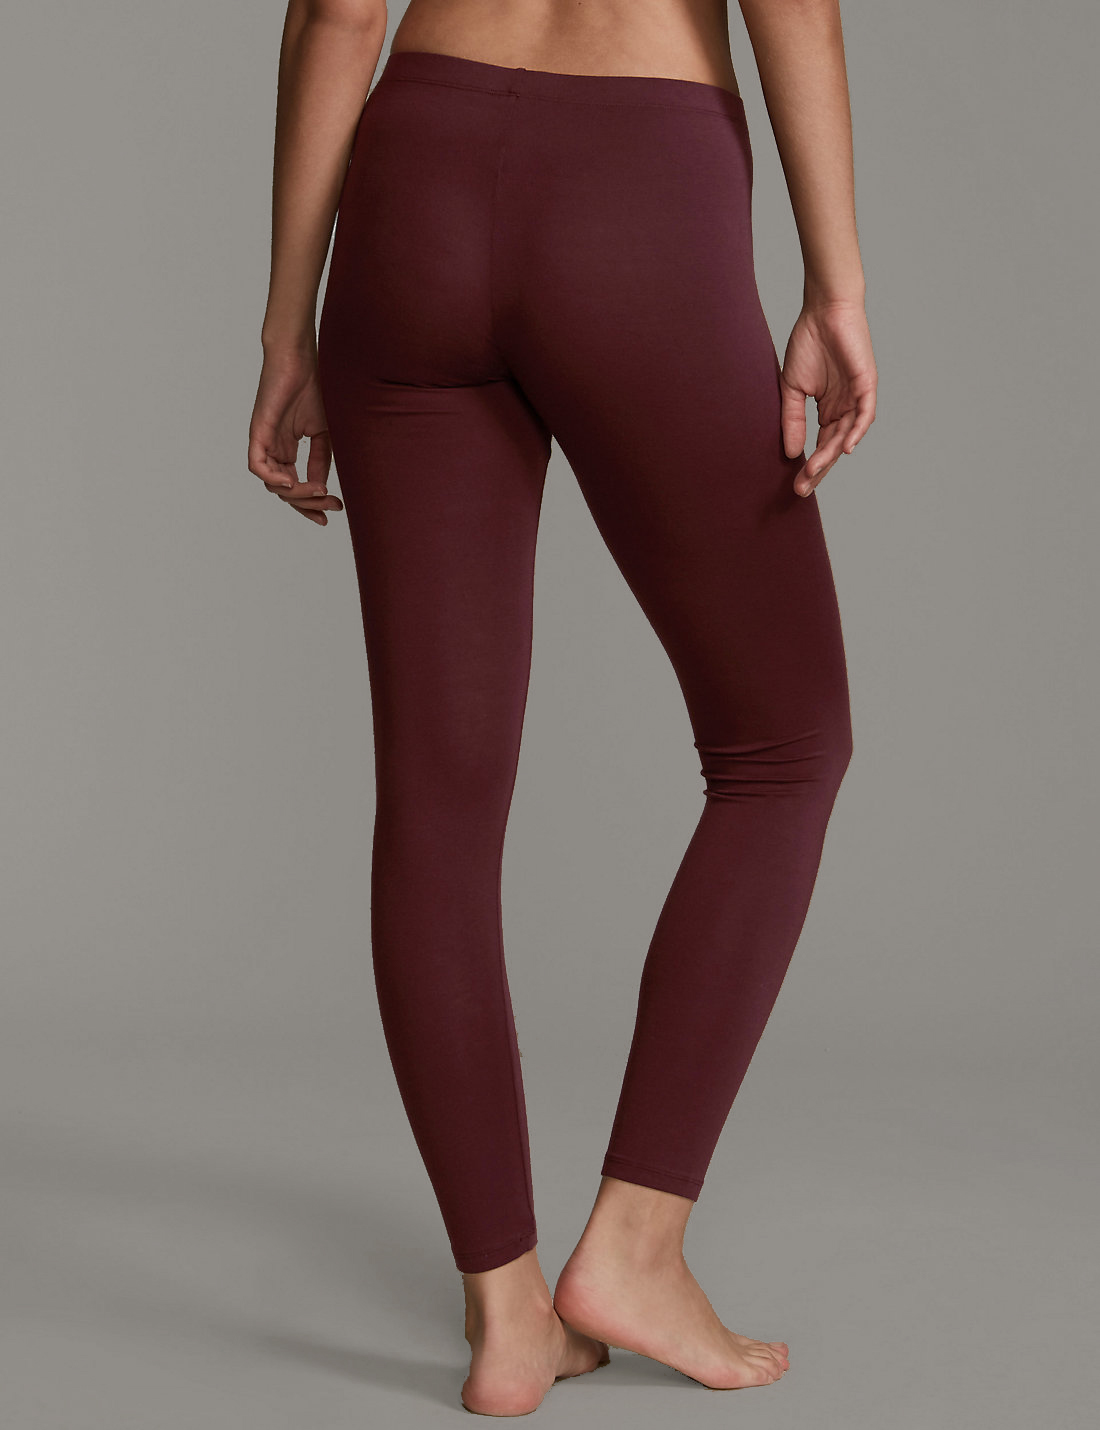 hot fit customized leggings for woman| Alibaba.com